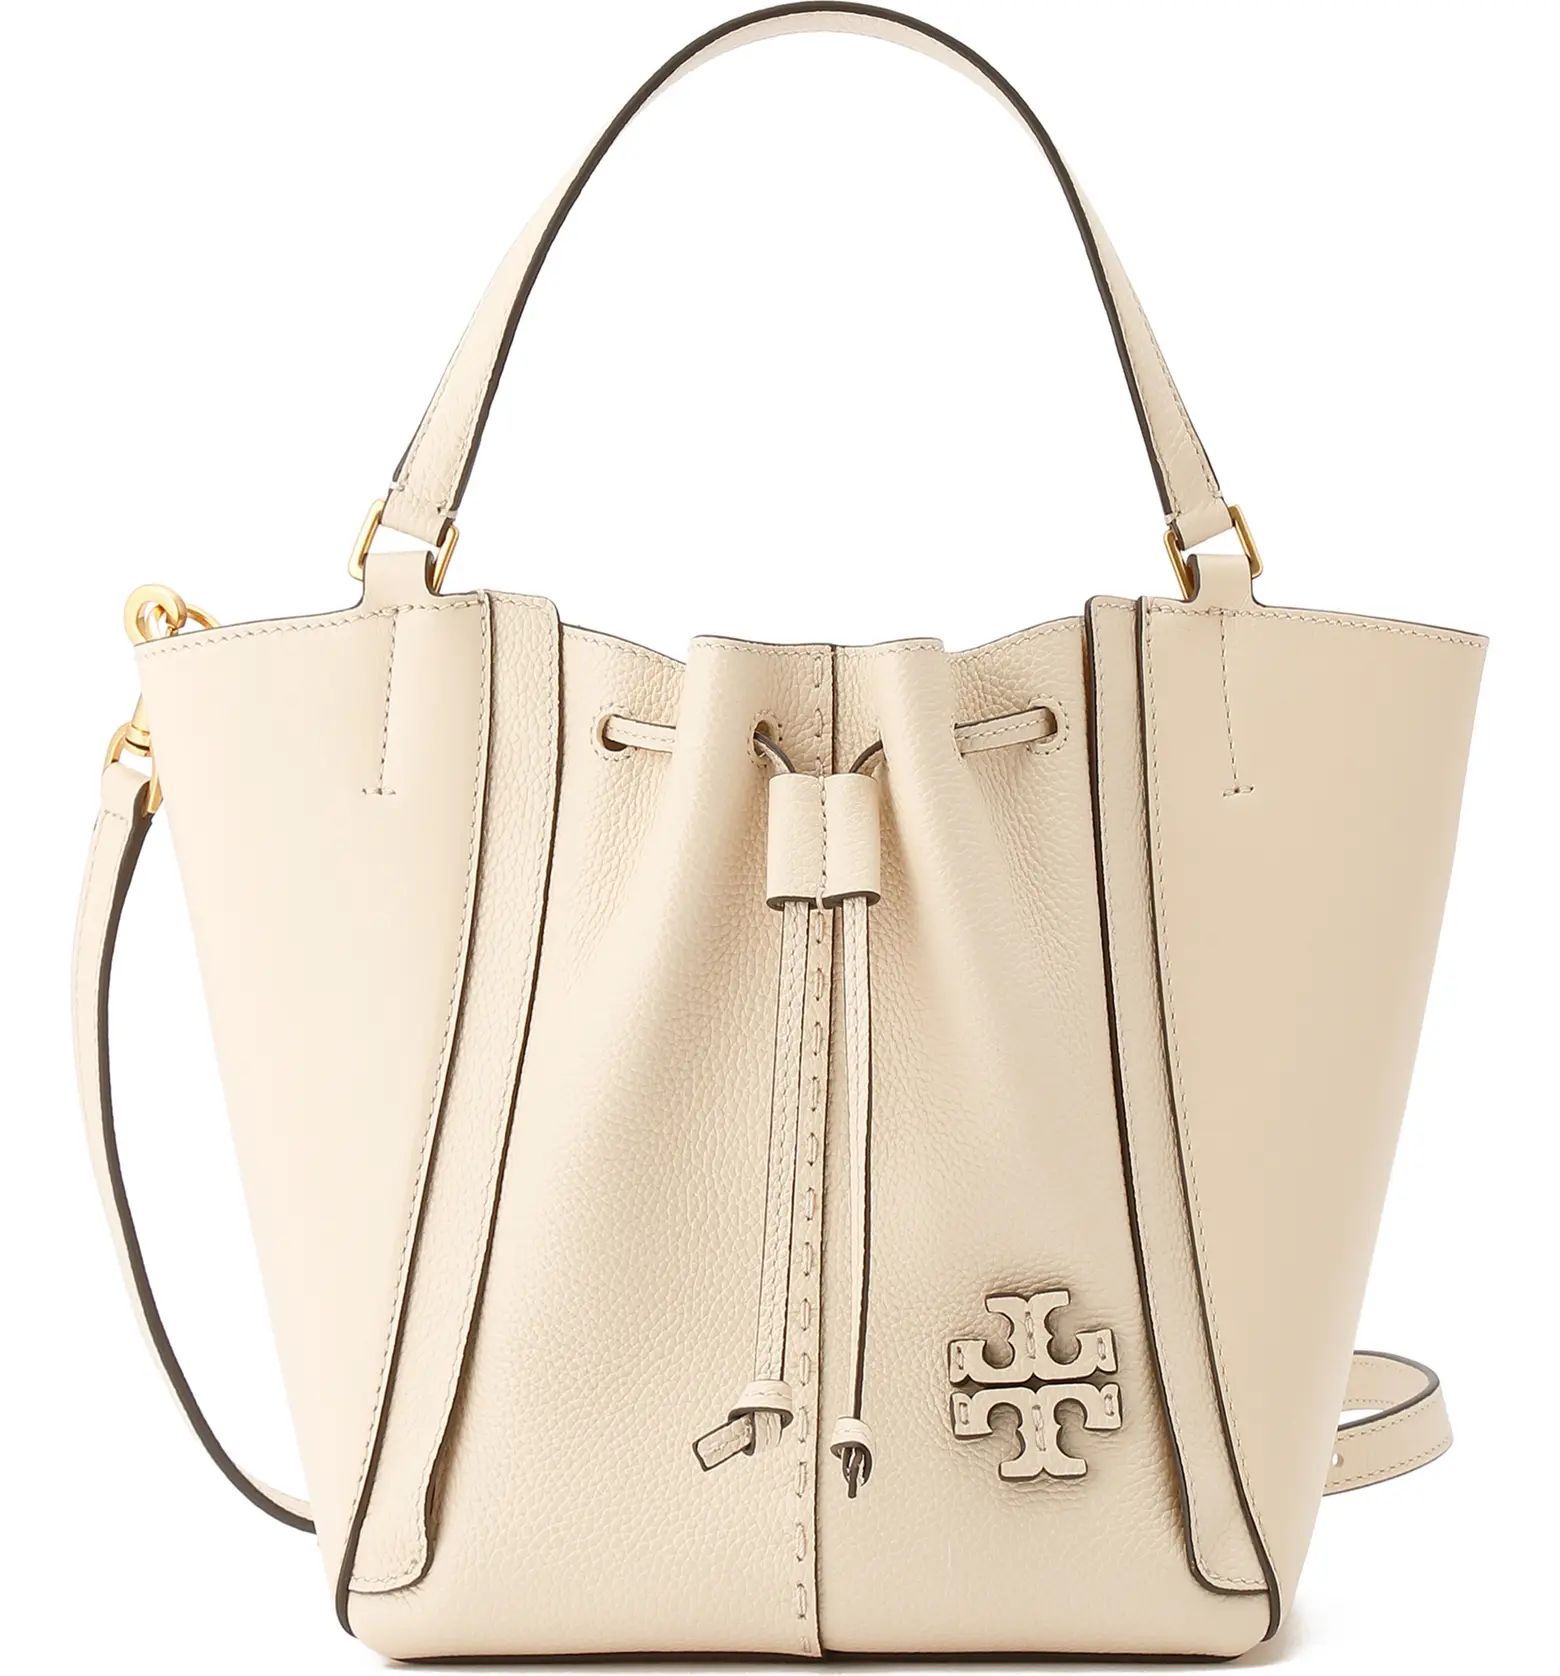 McGraw Dragonfly Leather Tote | Nordstrom